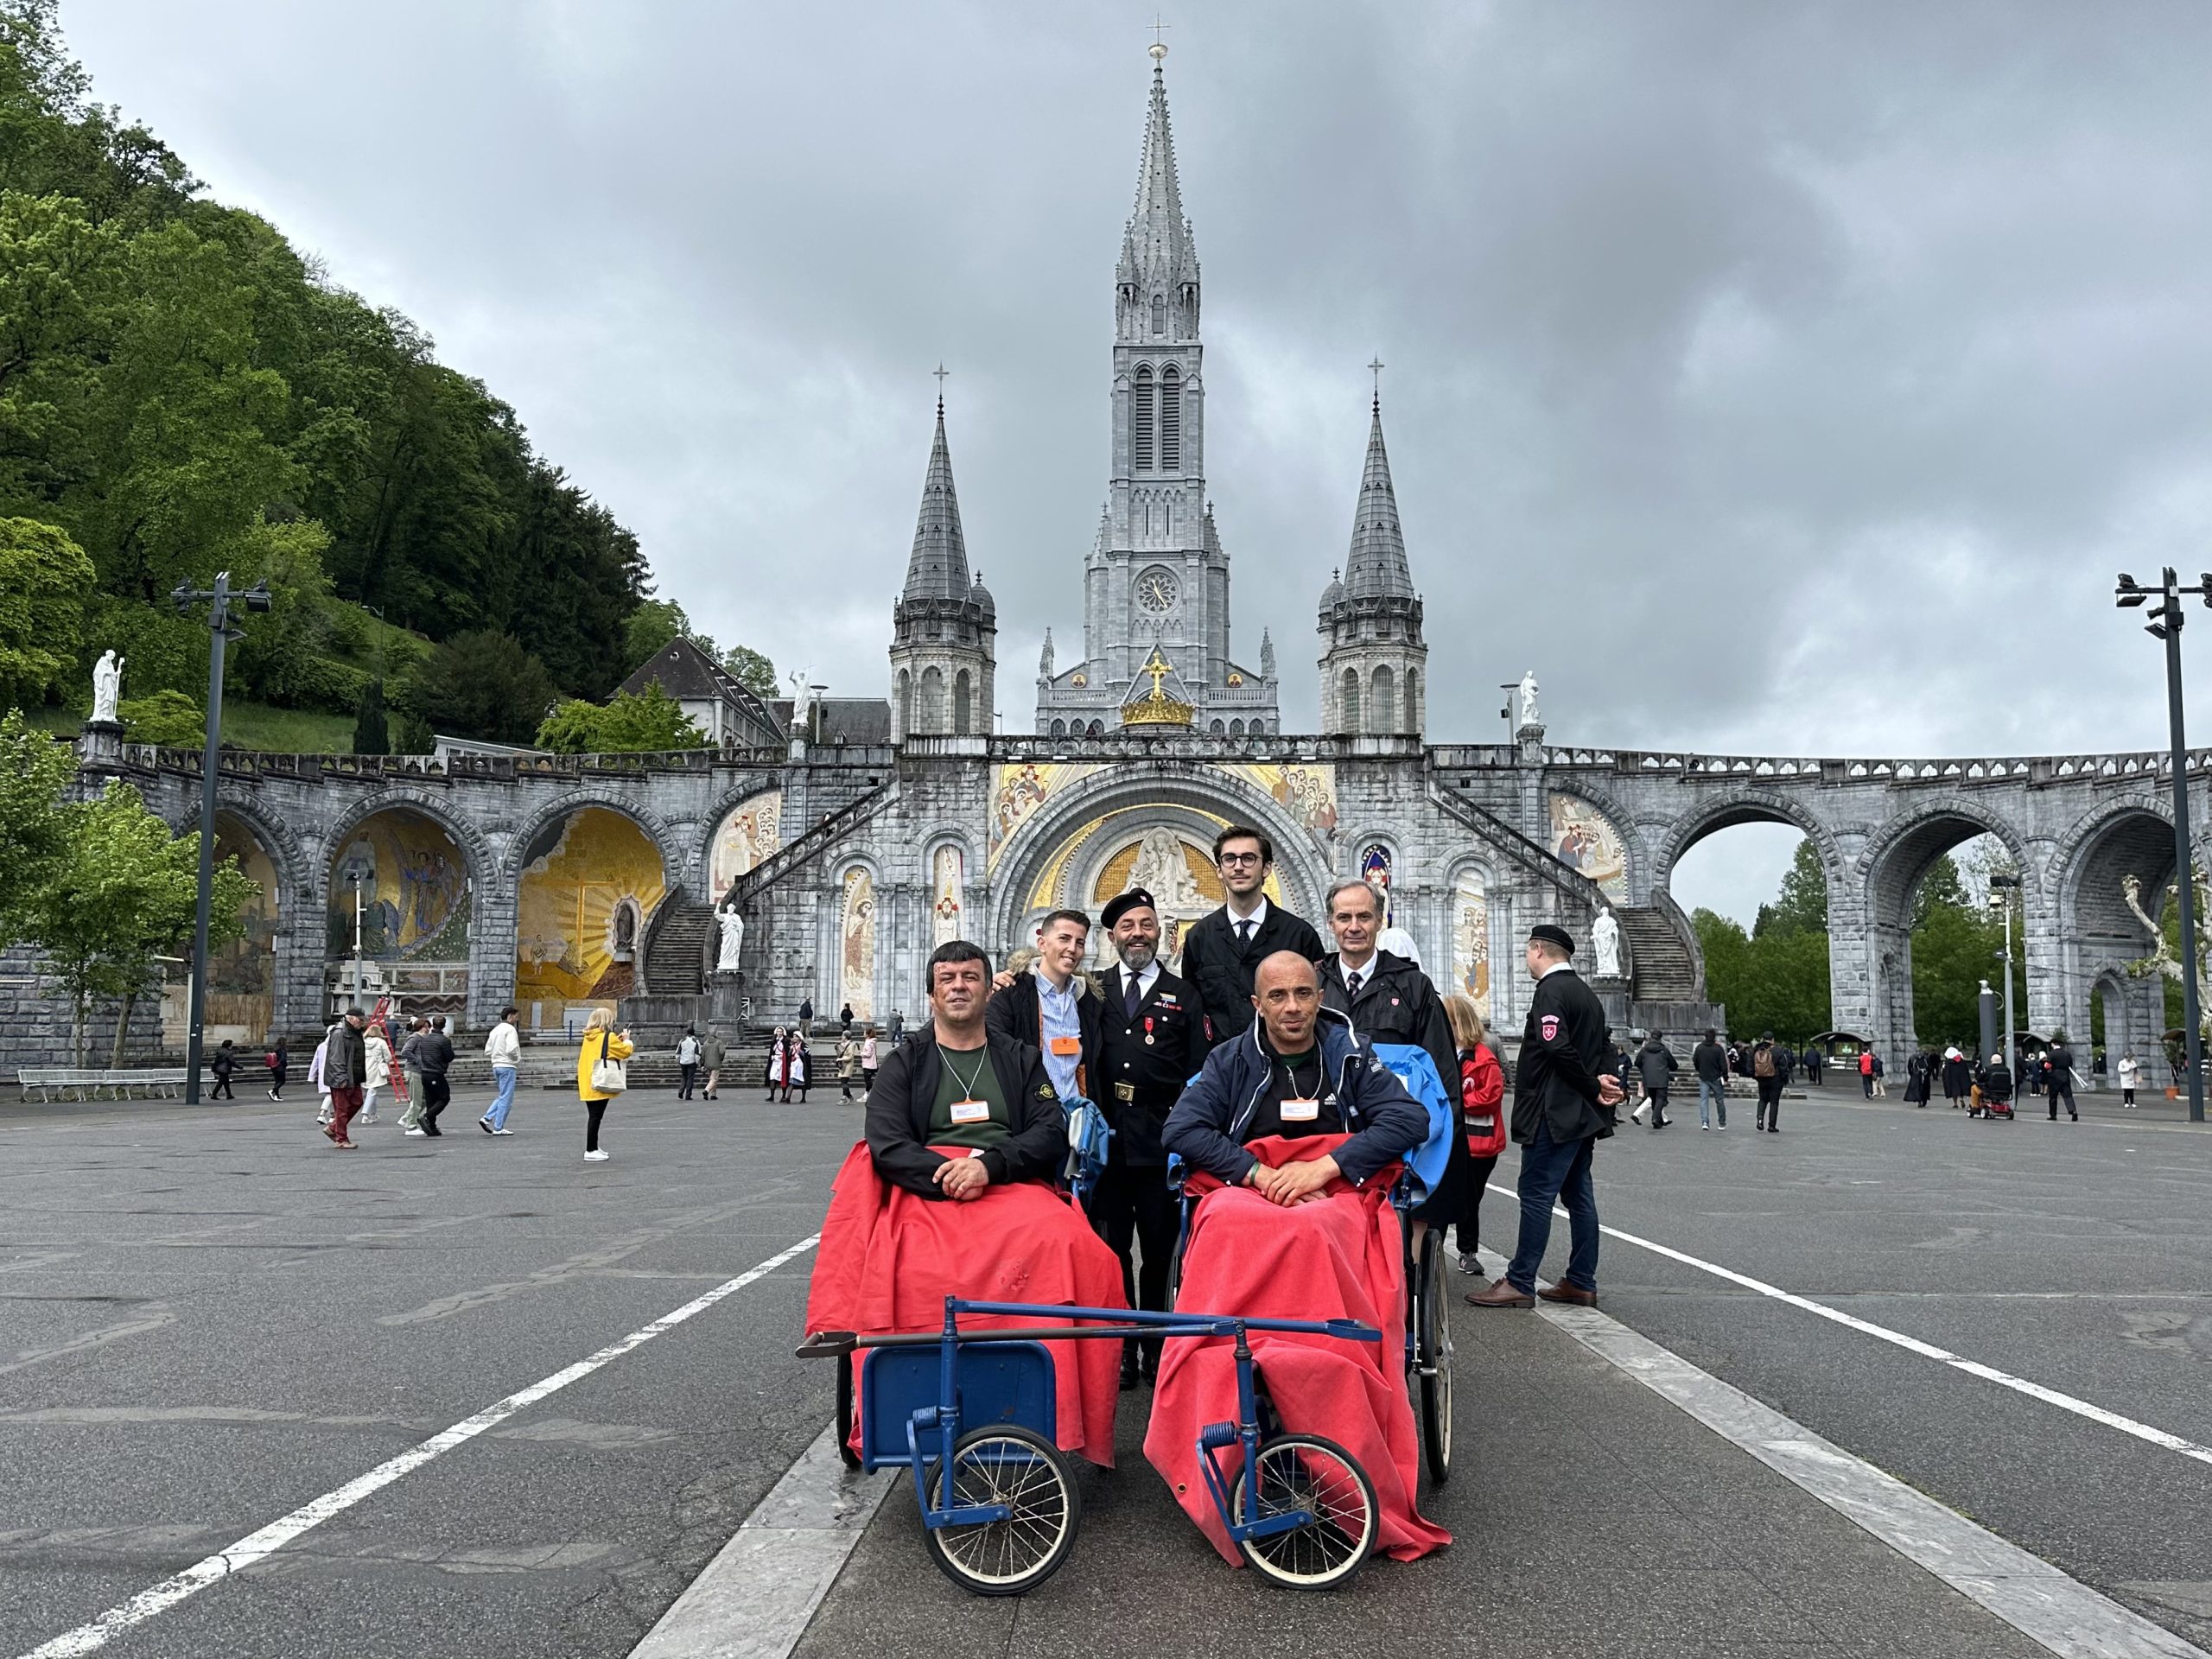 The streets of Lourdes flooded with the Order of Malta’s pilgrims’ uniforms